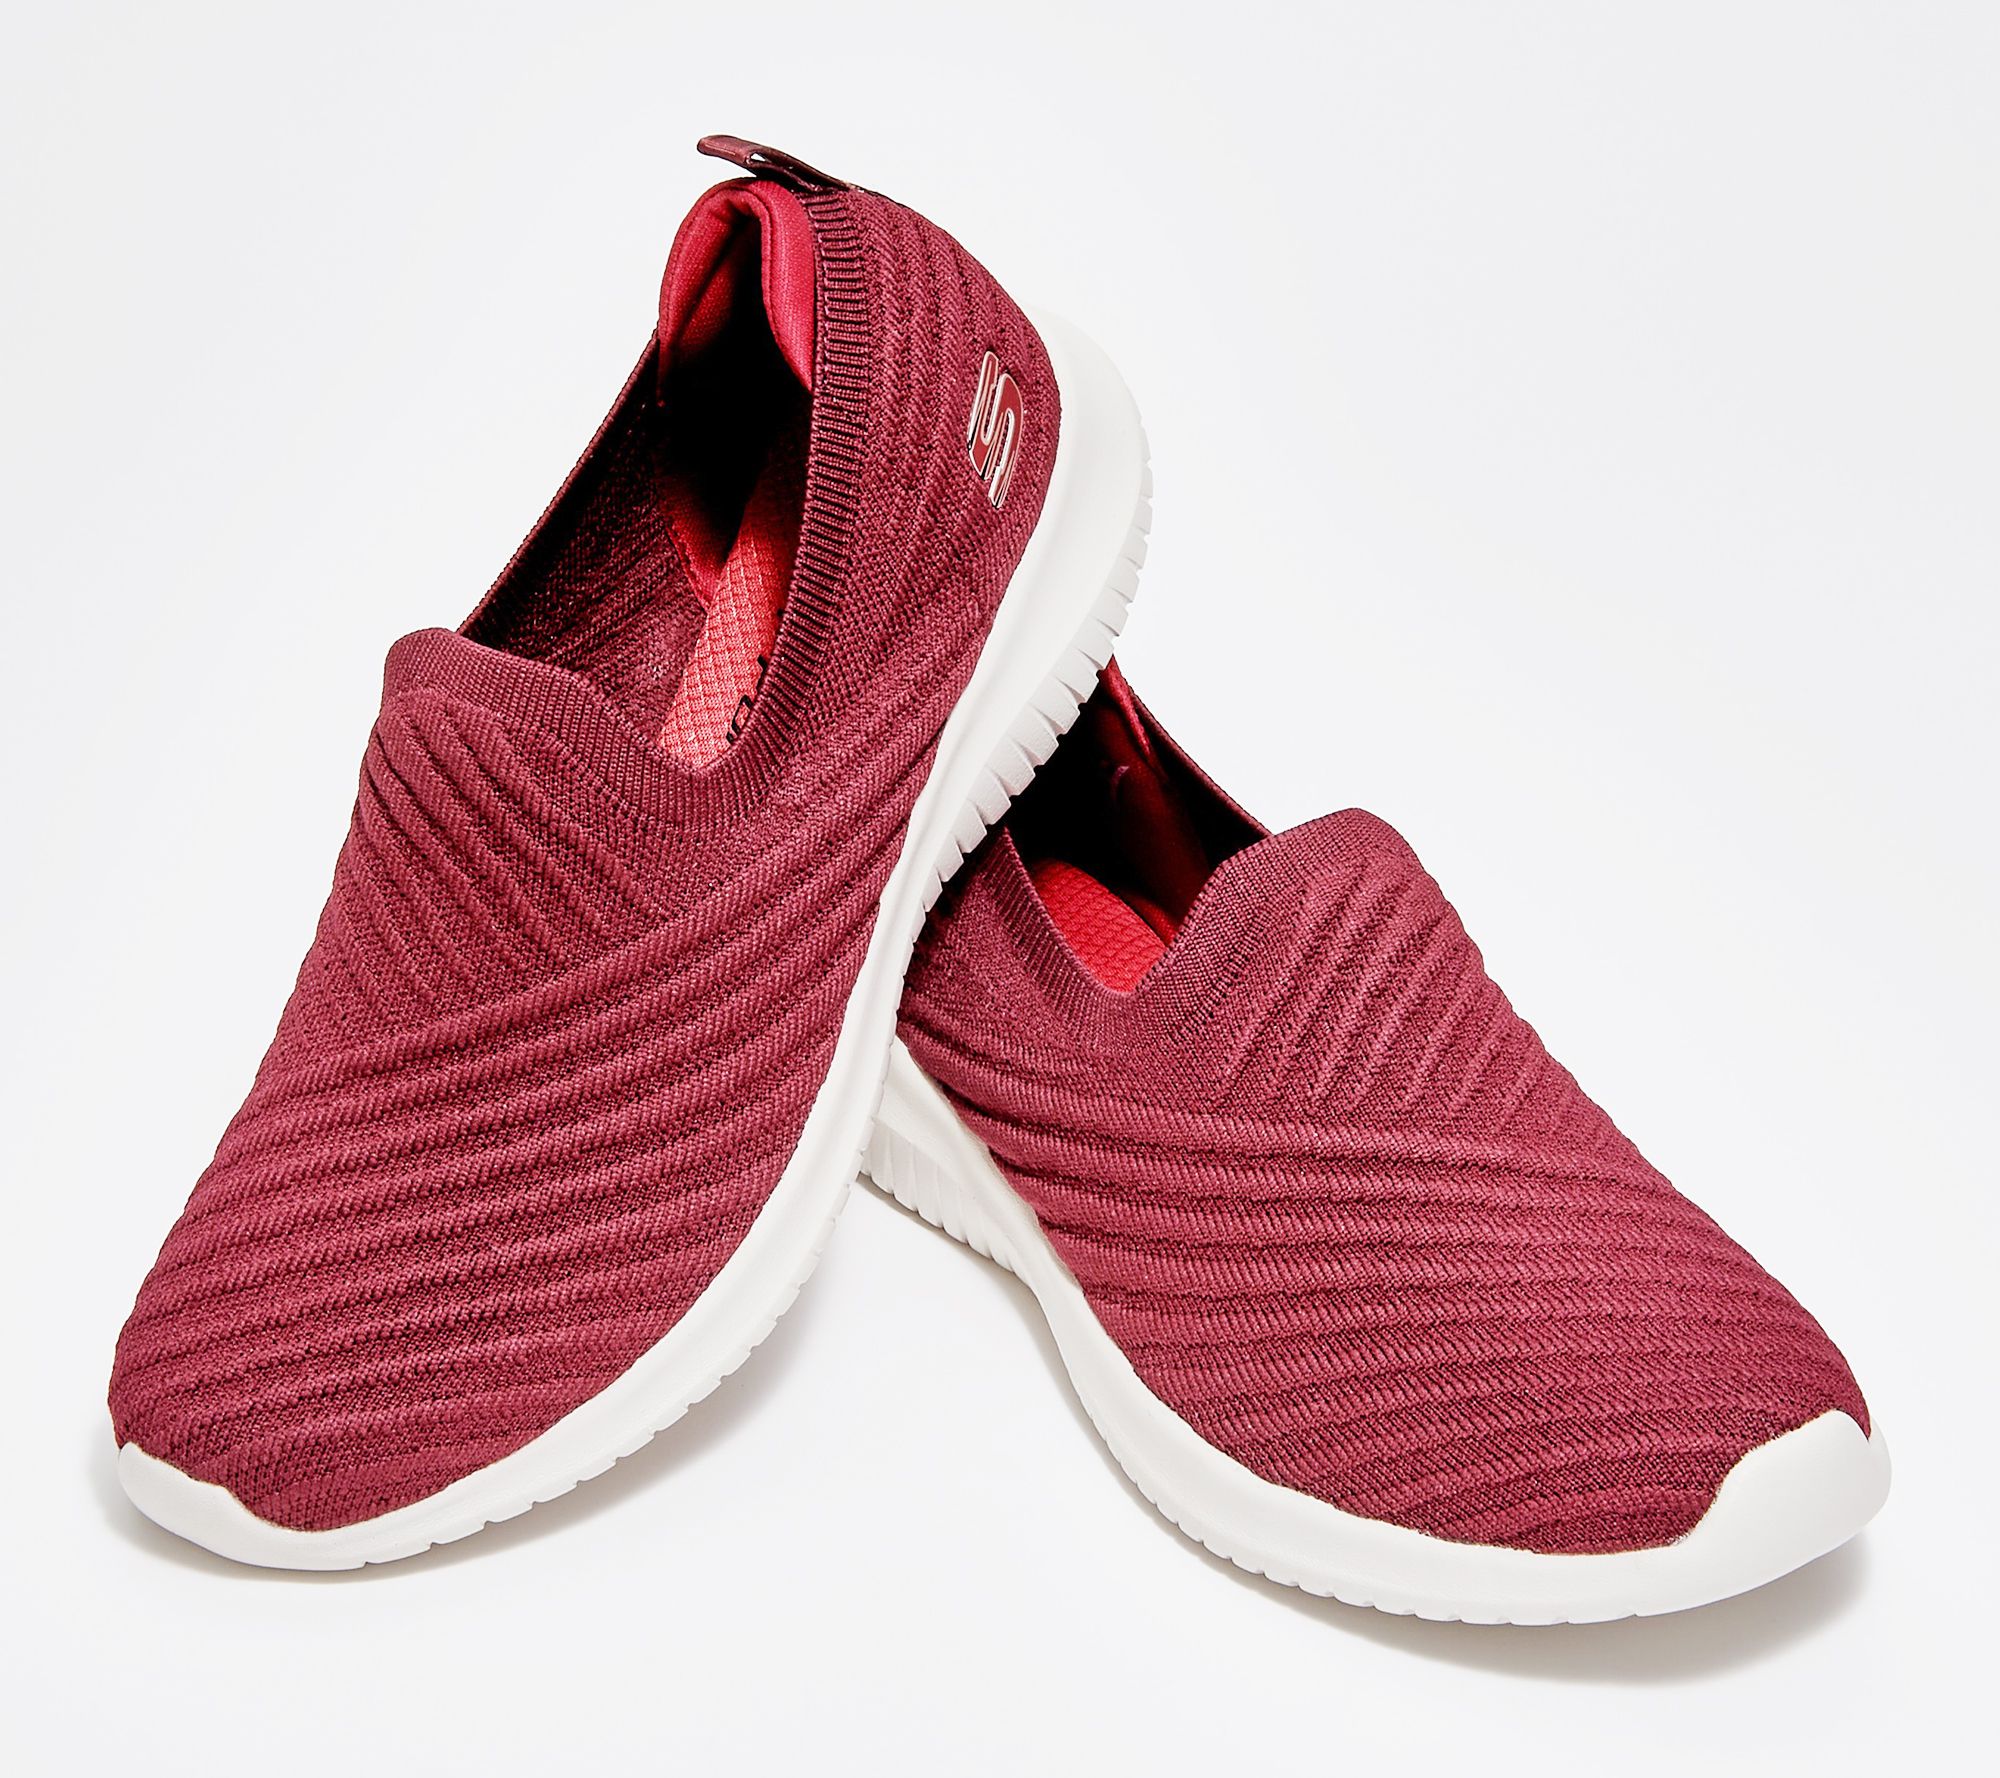 As Is" Skechers Ultra Flex Washable Knit Slip-On Shoes QVC.com